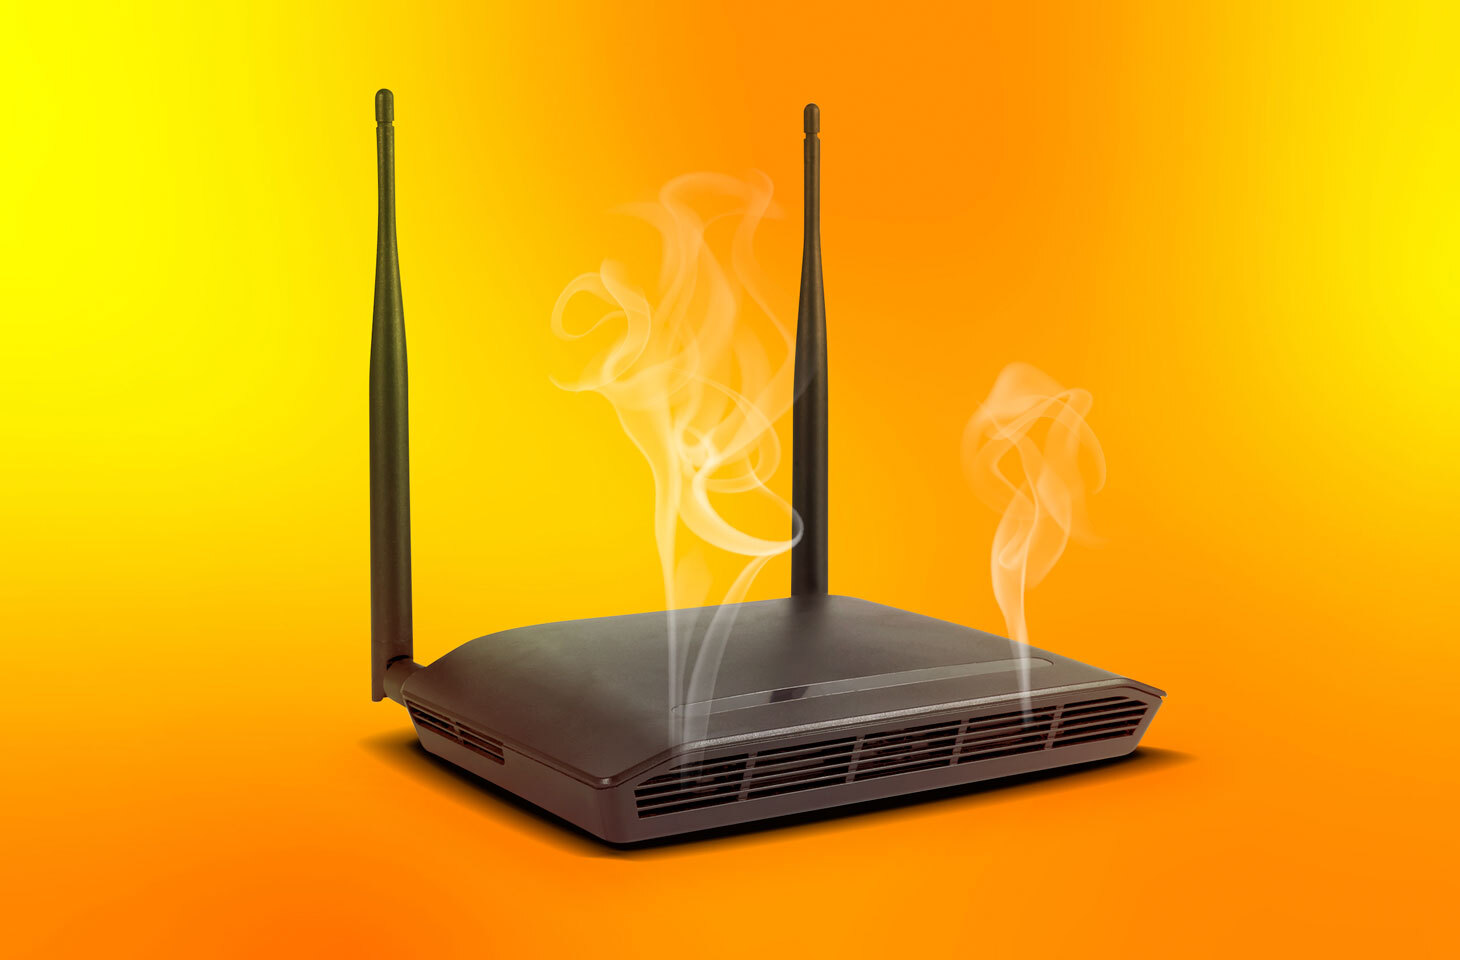 If your internet connection is slow, one reason could be router malware. We explain how routers get infected and how to guard against attacks